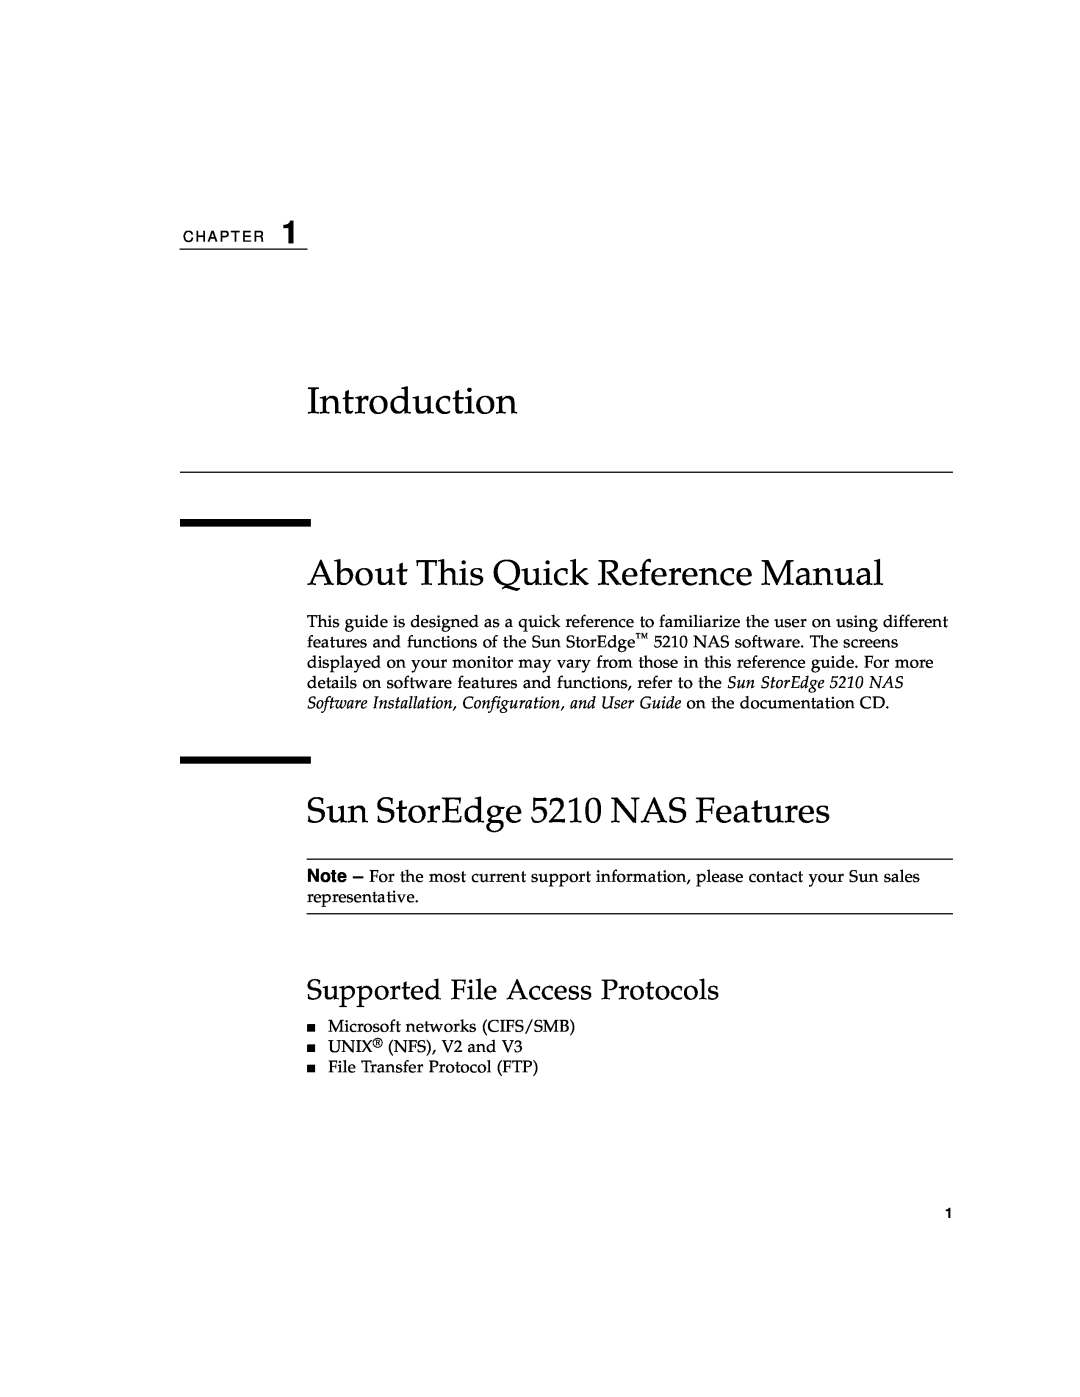 Sun Microsystems manual Introduction, About This Quick Reference Manual, Sun StorEdge 5210 NAS Features 